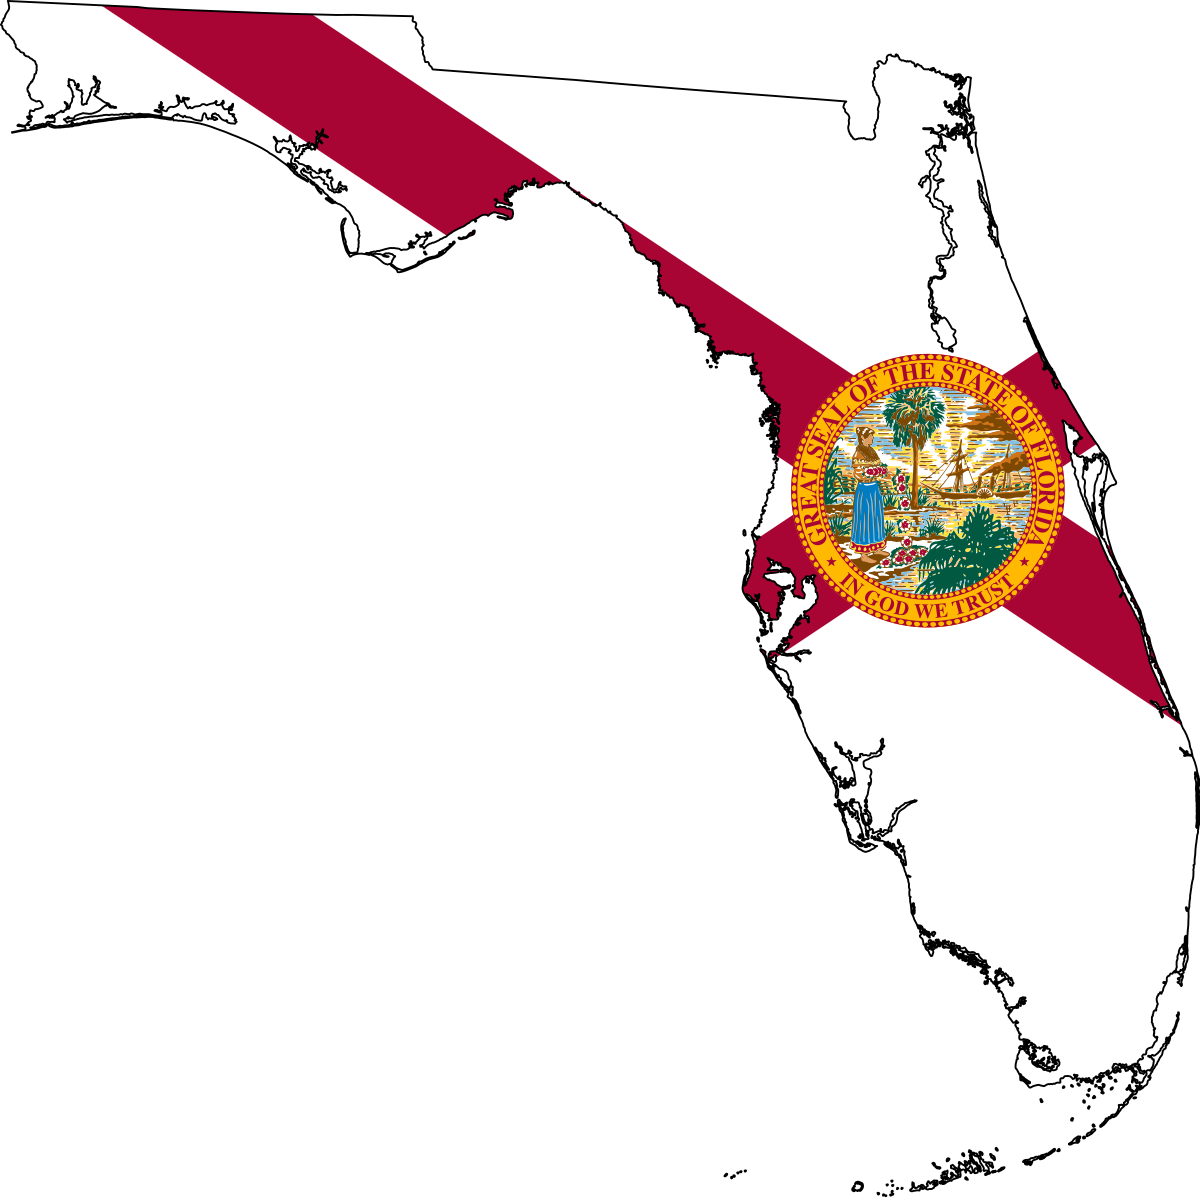 Download File:Flag-map of Florida.svg - Wikimedia Commons